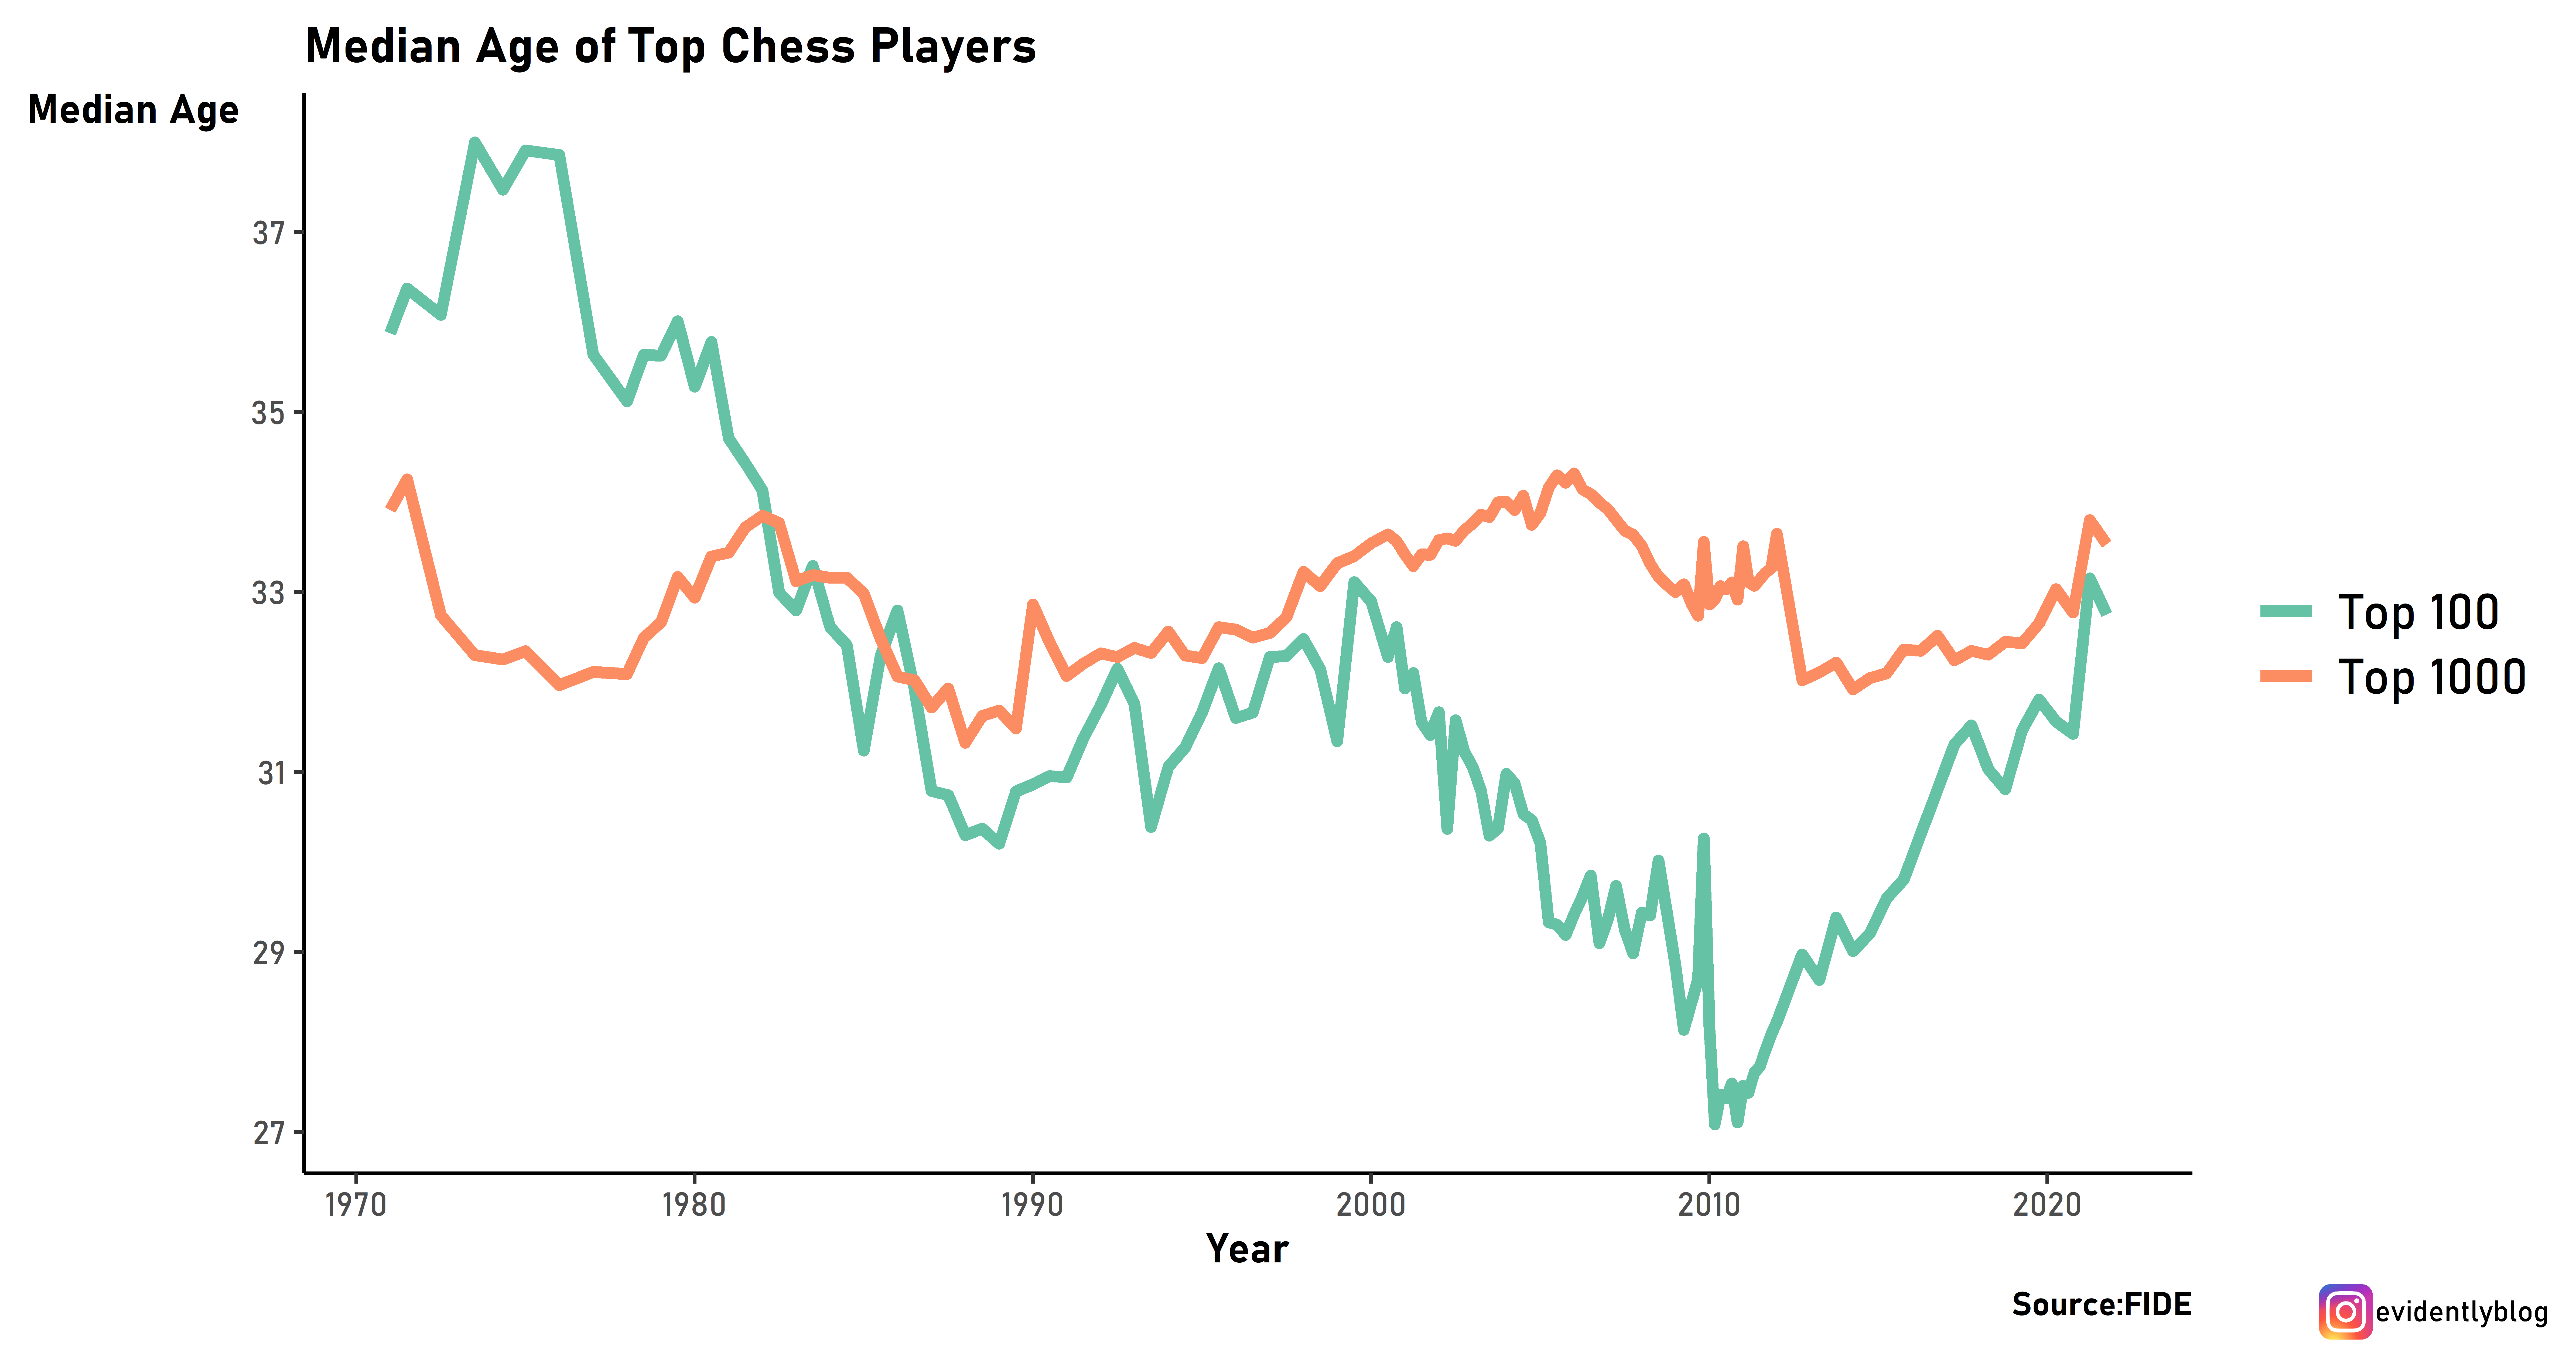 What Elite Chess Players Can Teach Us About The Aging Curve